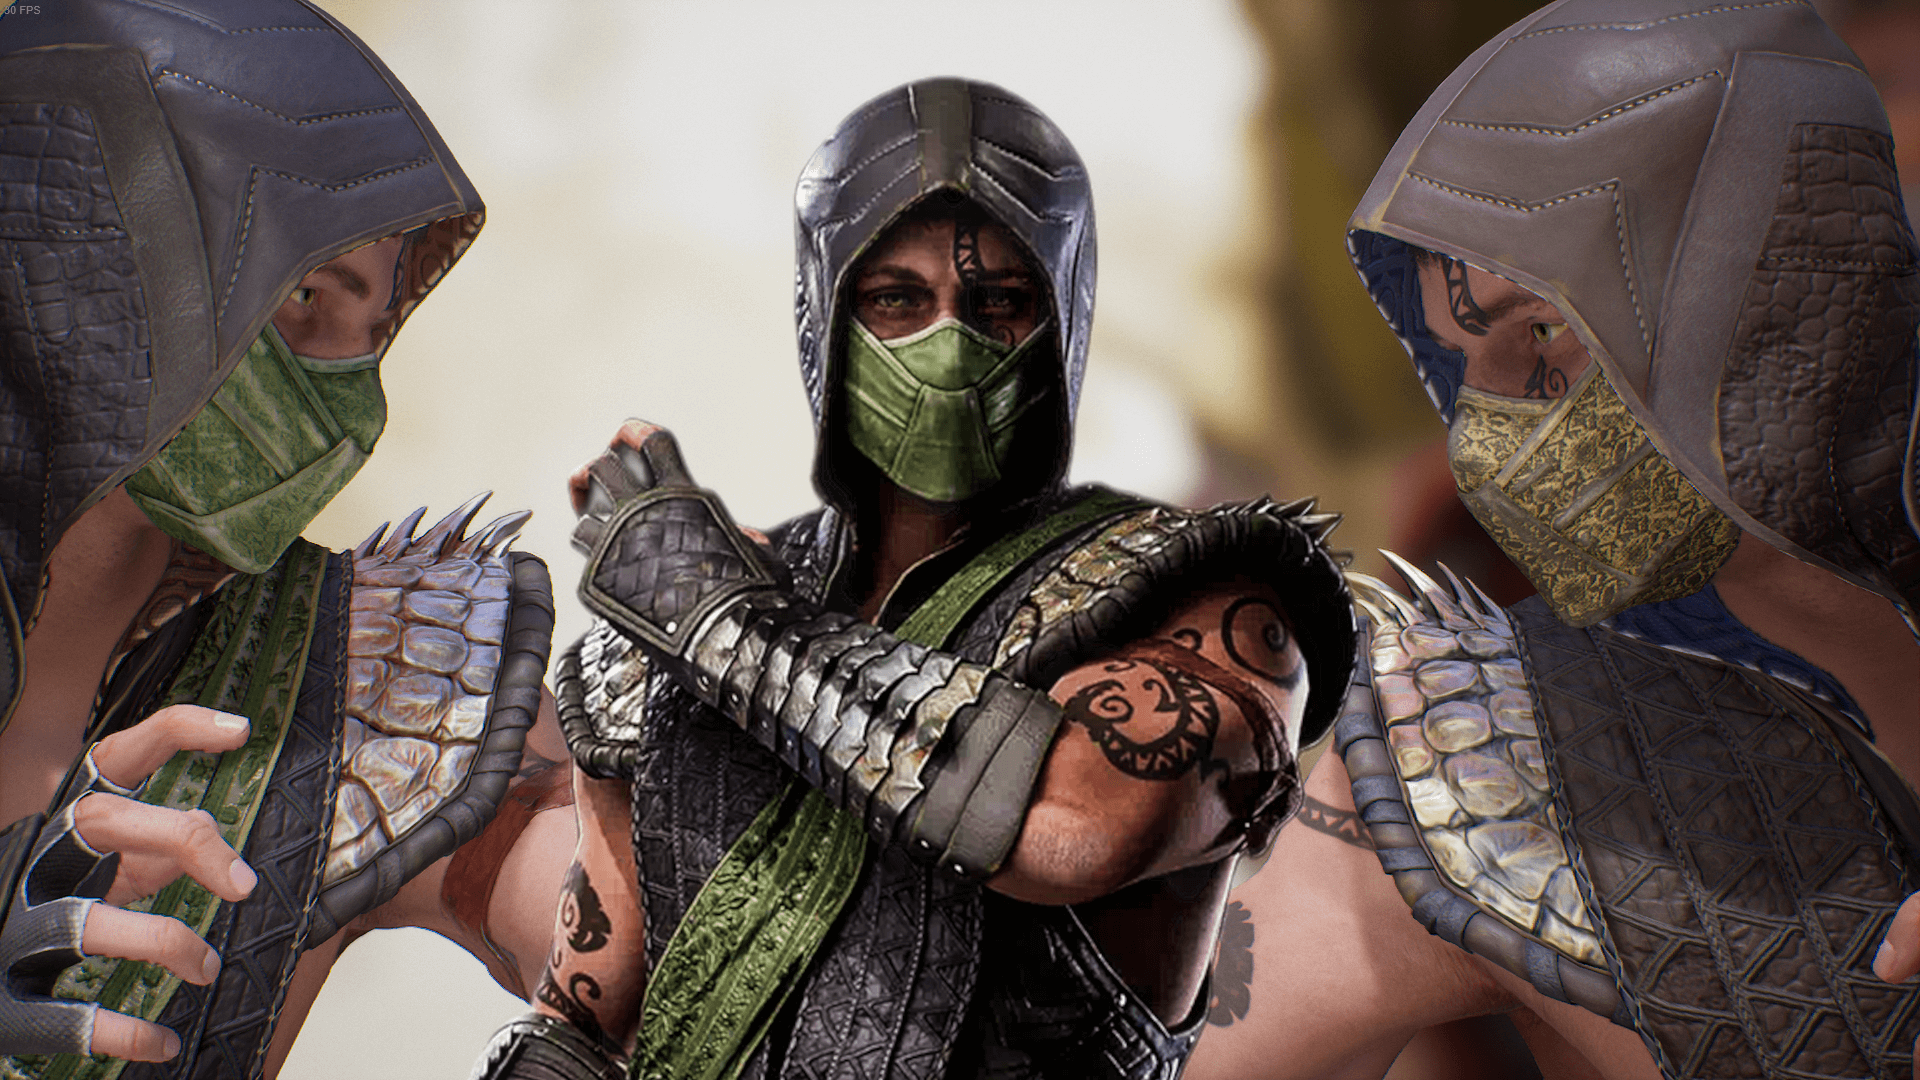 Mortal Kombat 1 Reptile Character Guide: All You Need to Know